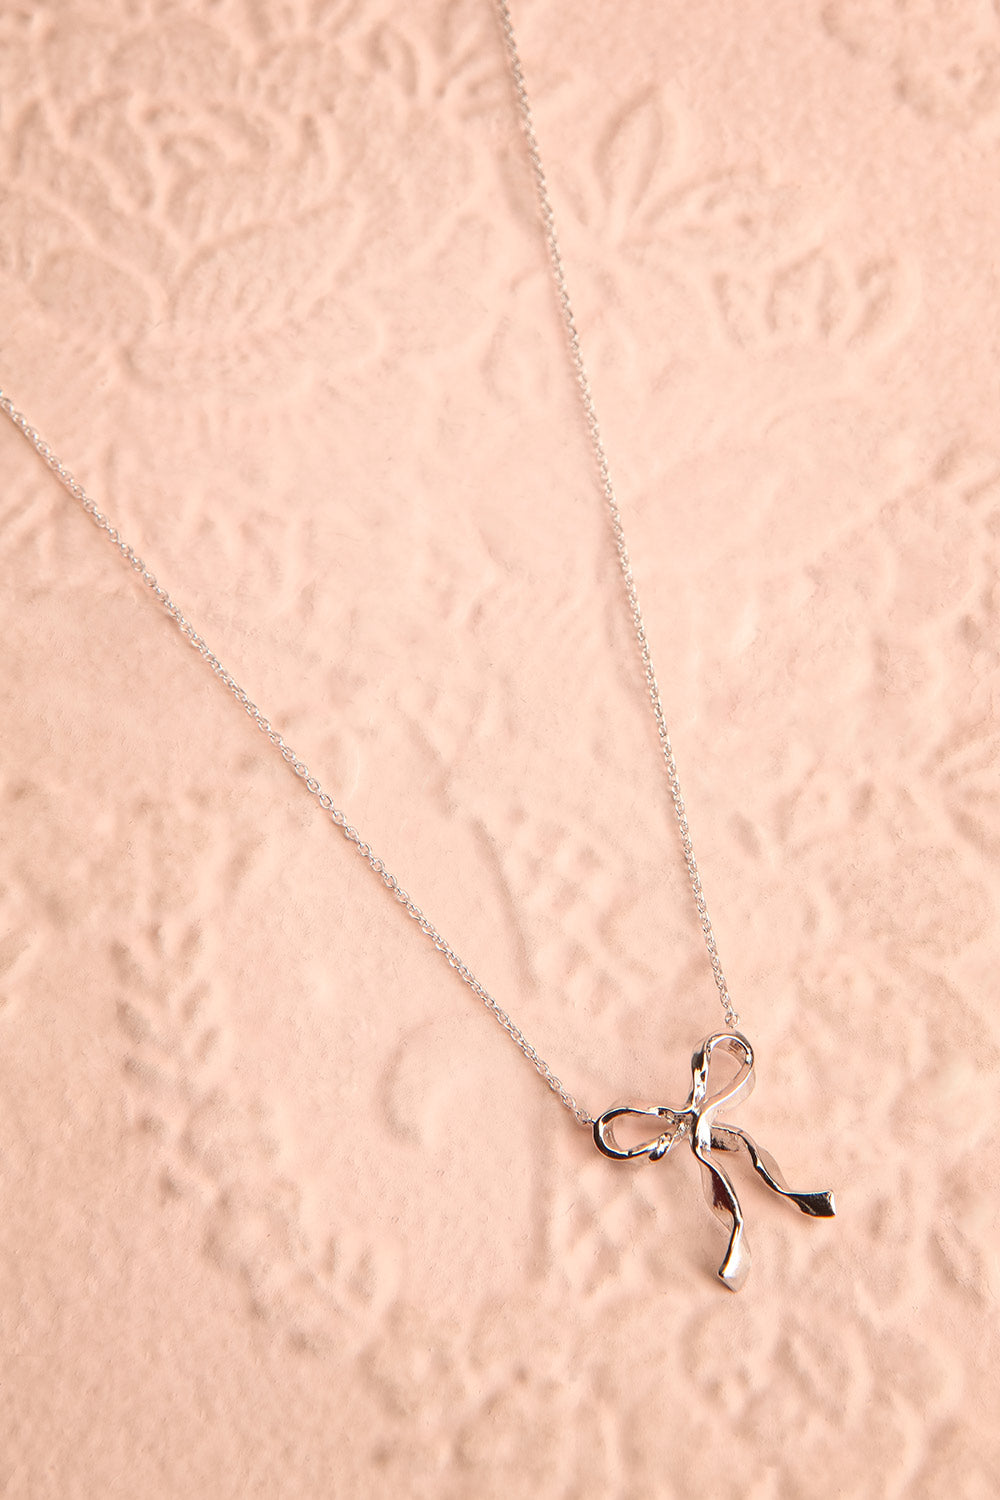 Triteia Silver Necklace w/ Bow Charm | Boutique 1861 flat view